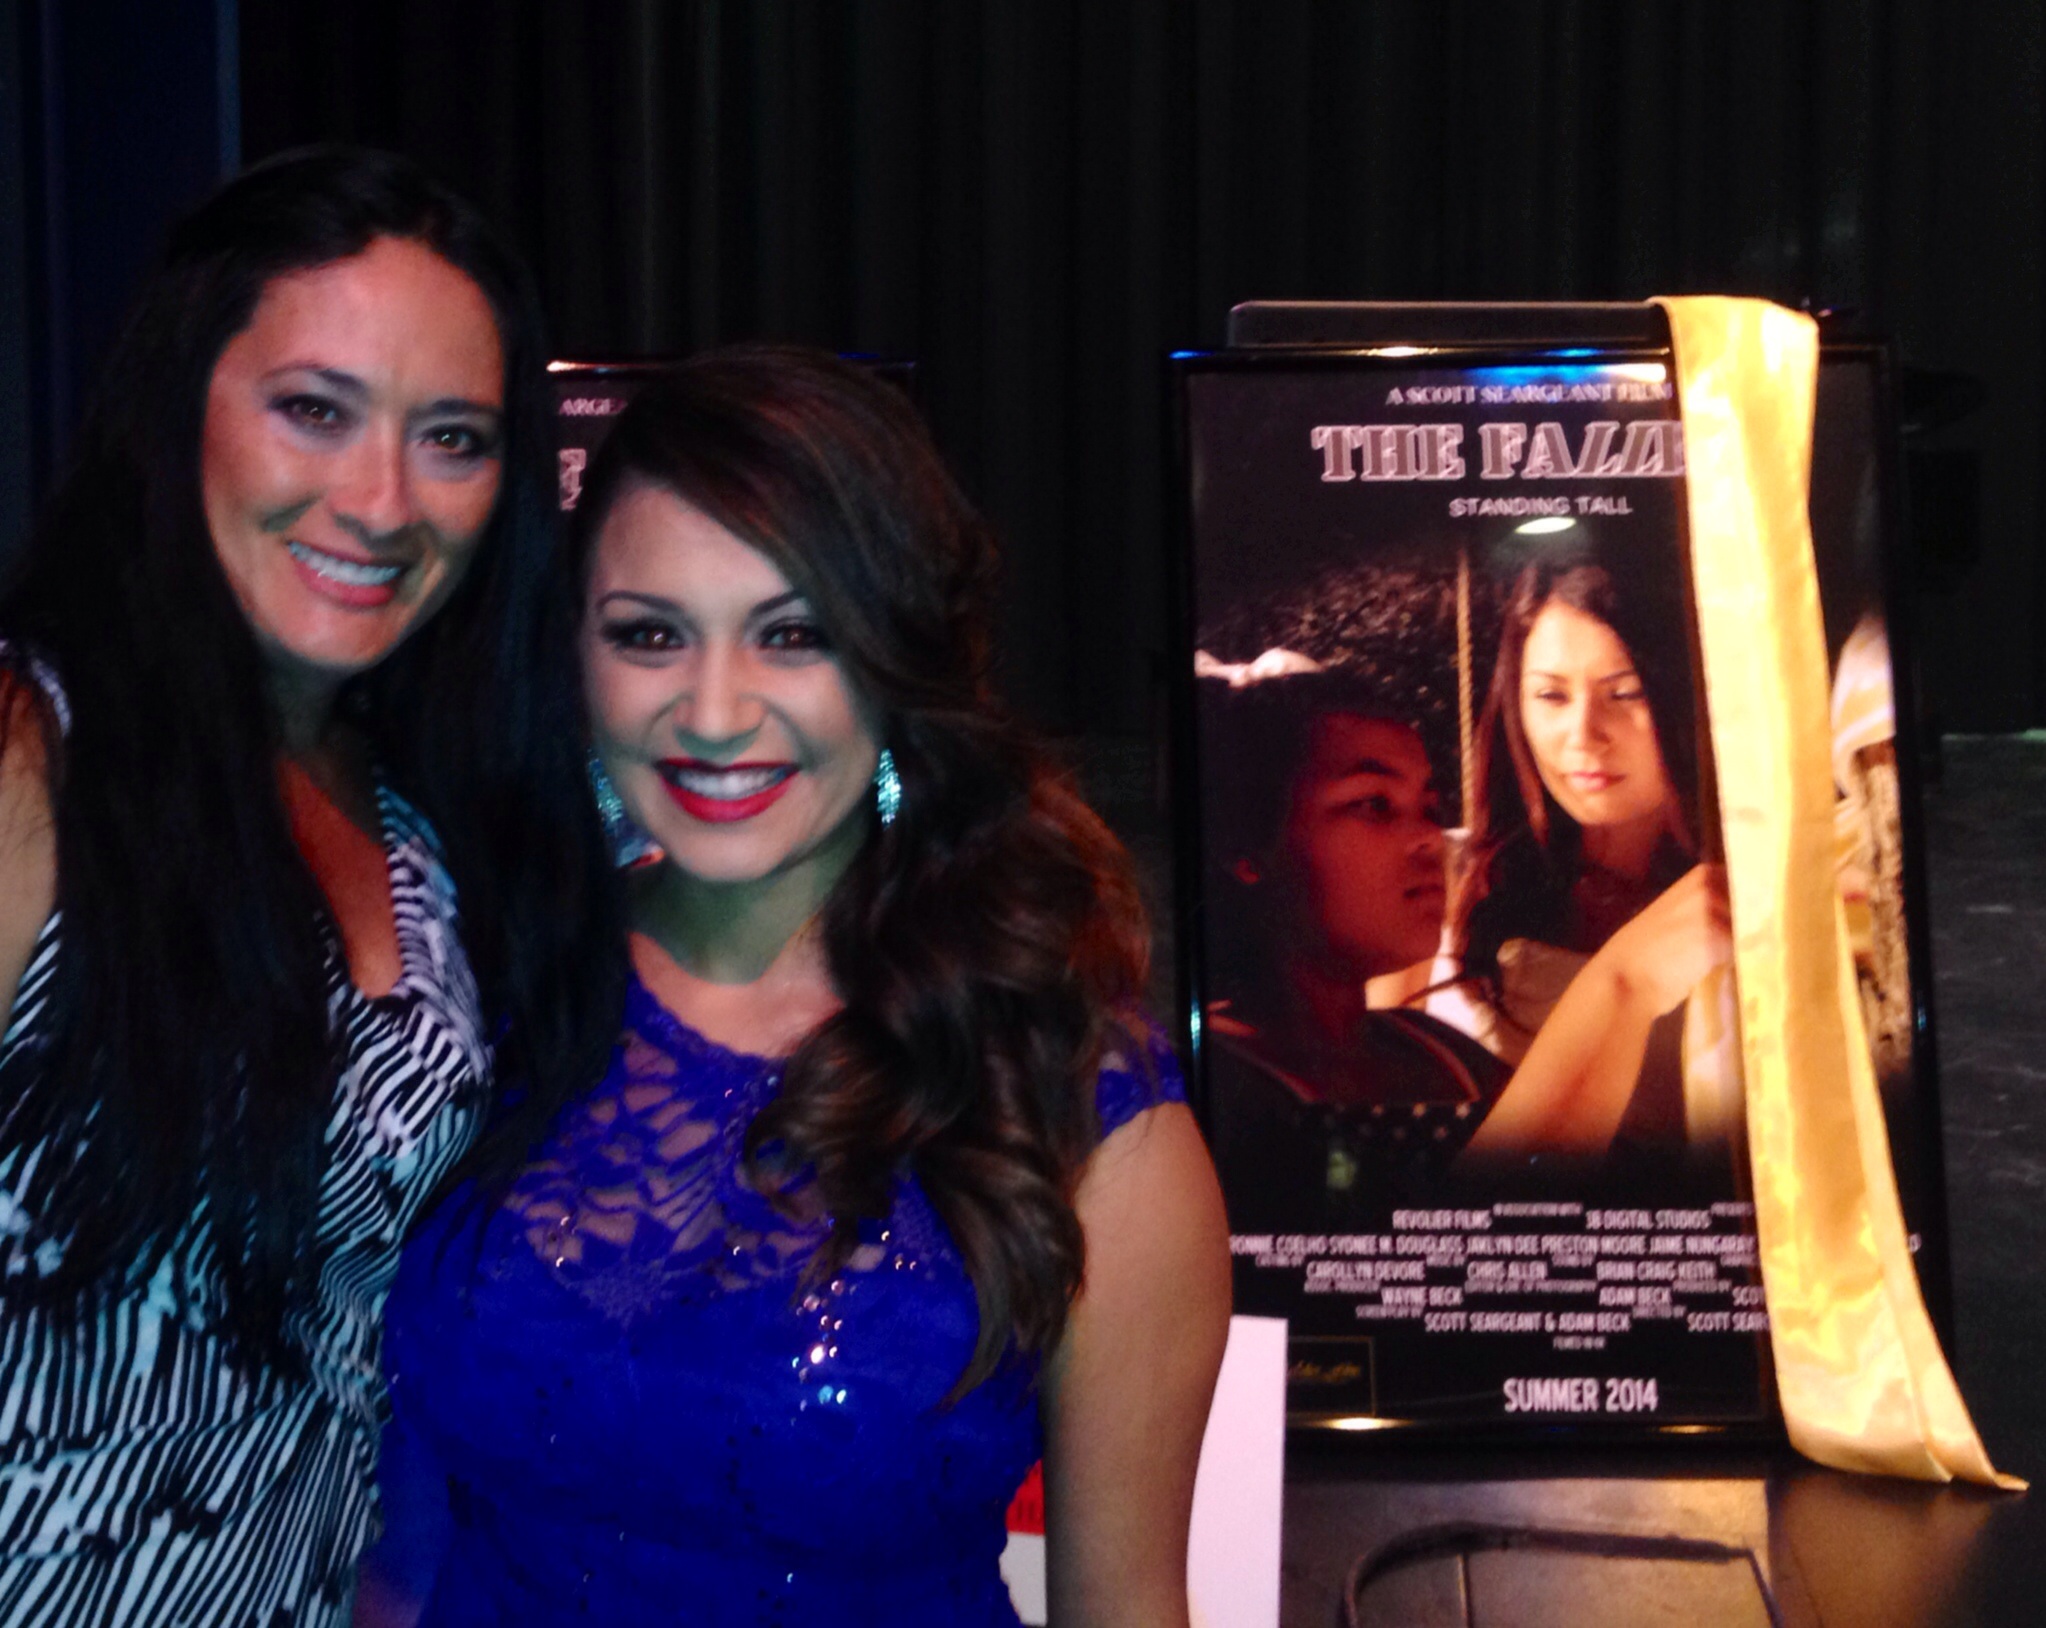 Tricia Stone and Jackie Dee at the premiere of The Fallen.